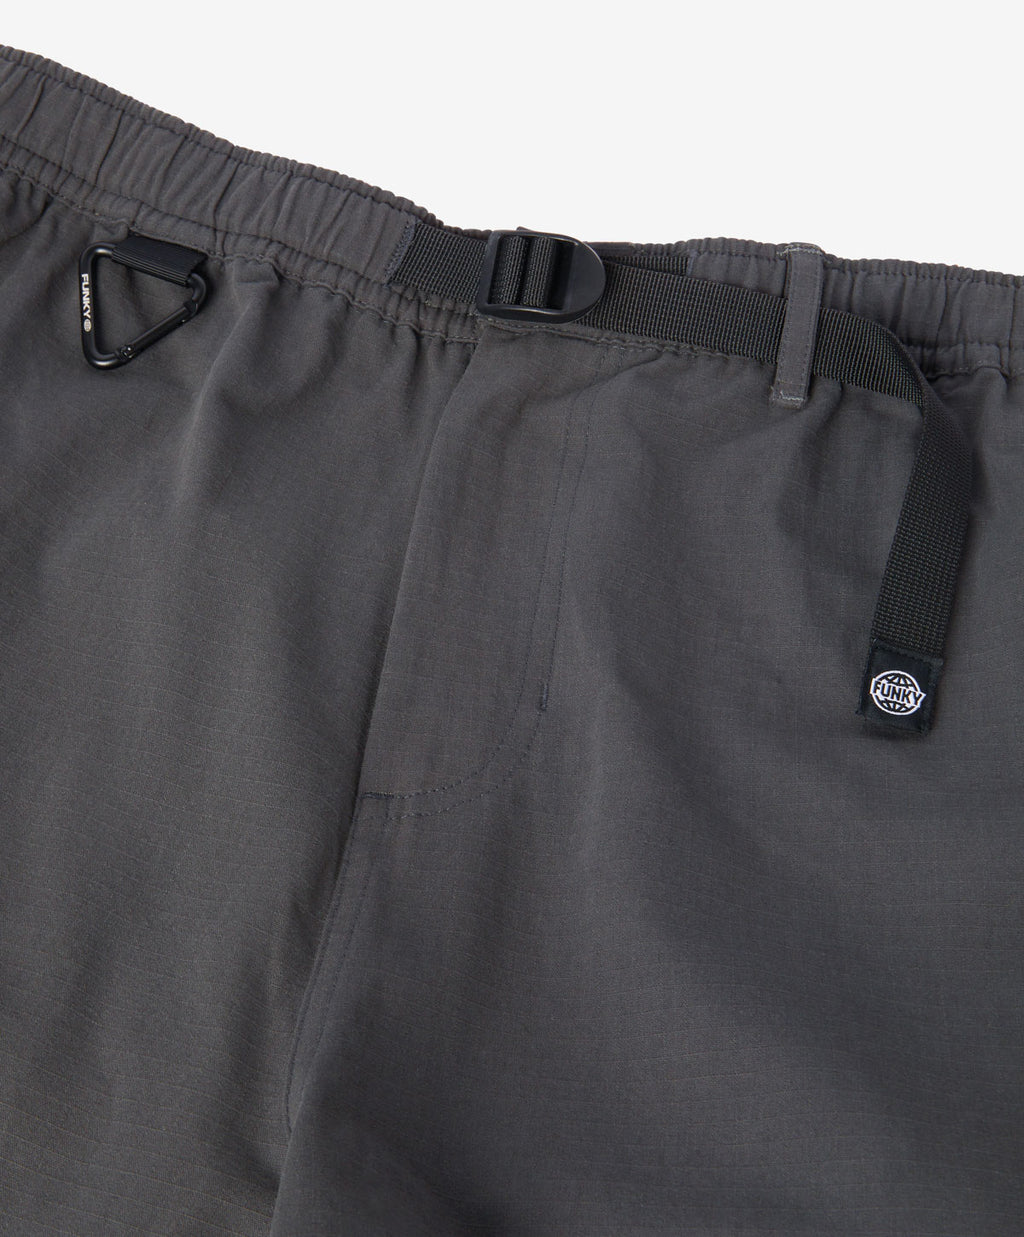 OS RIPSTOP TROUSERS BLACK